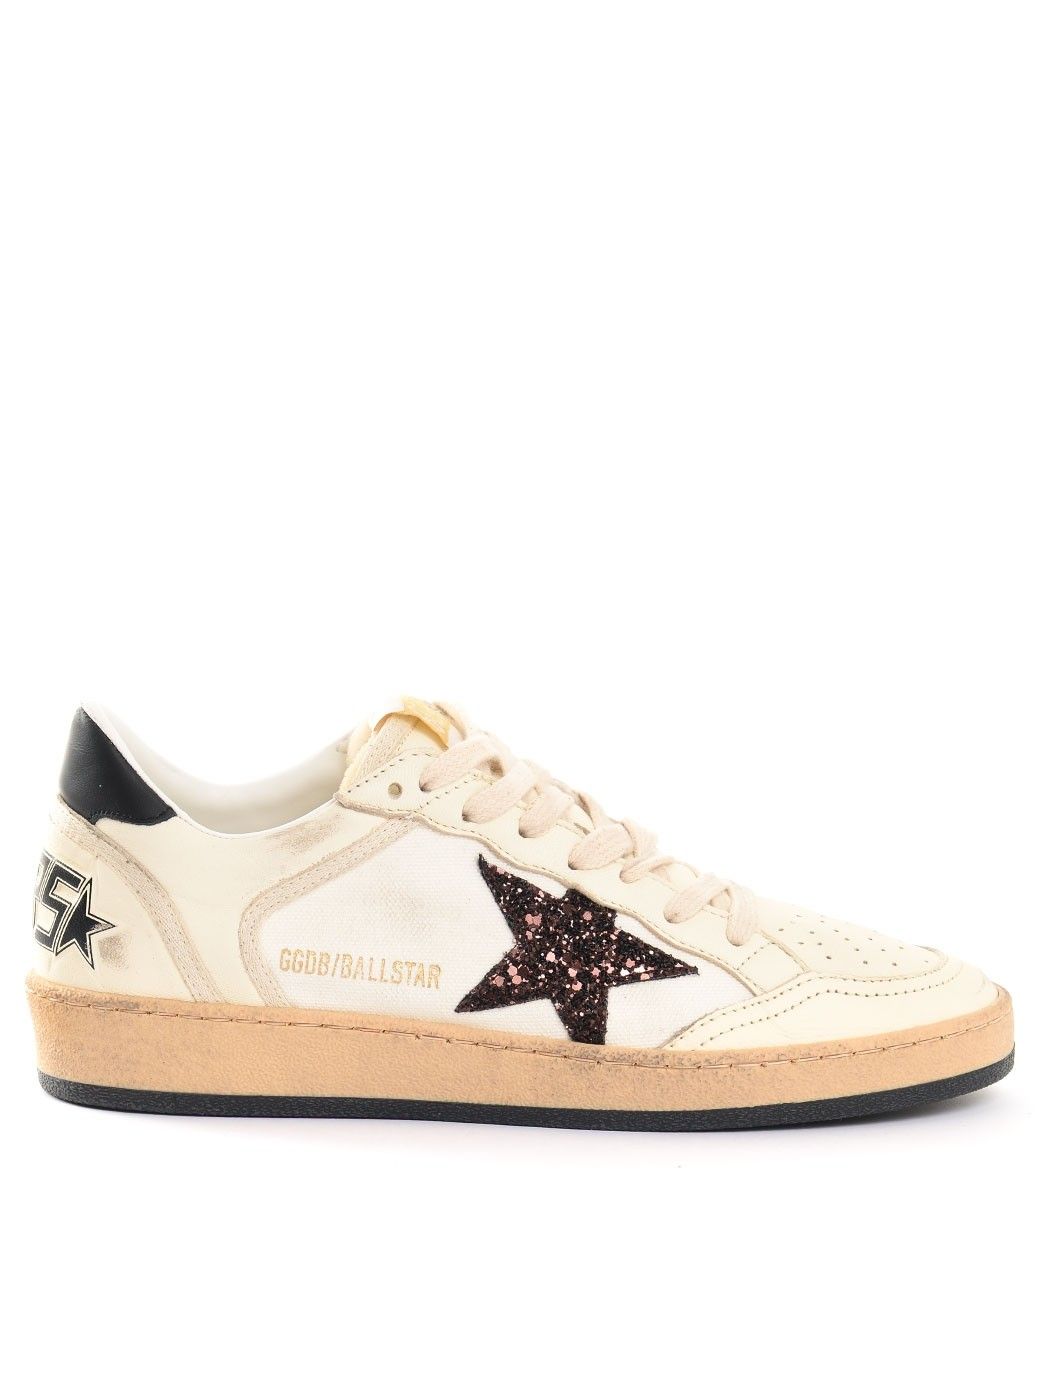  WOMAN SHOES,GIVENCHY SHOES,GOLDEN GOOSE SHOES,MARNI SHOES  GOLDEN GOOSE GWF00327